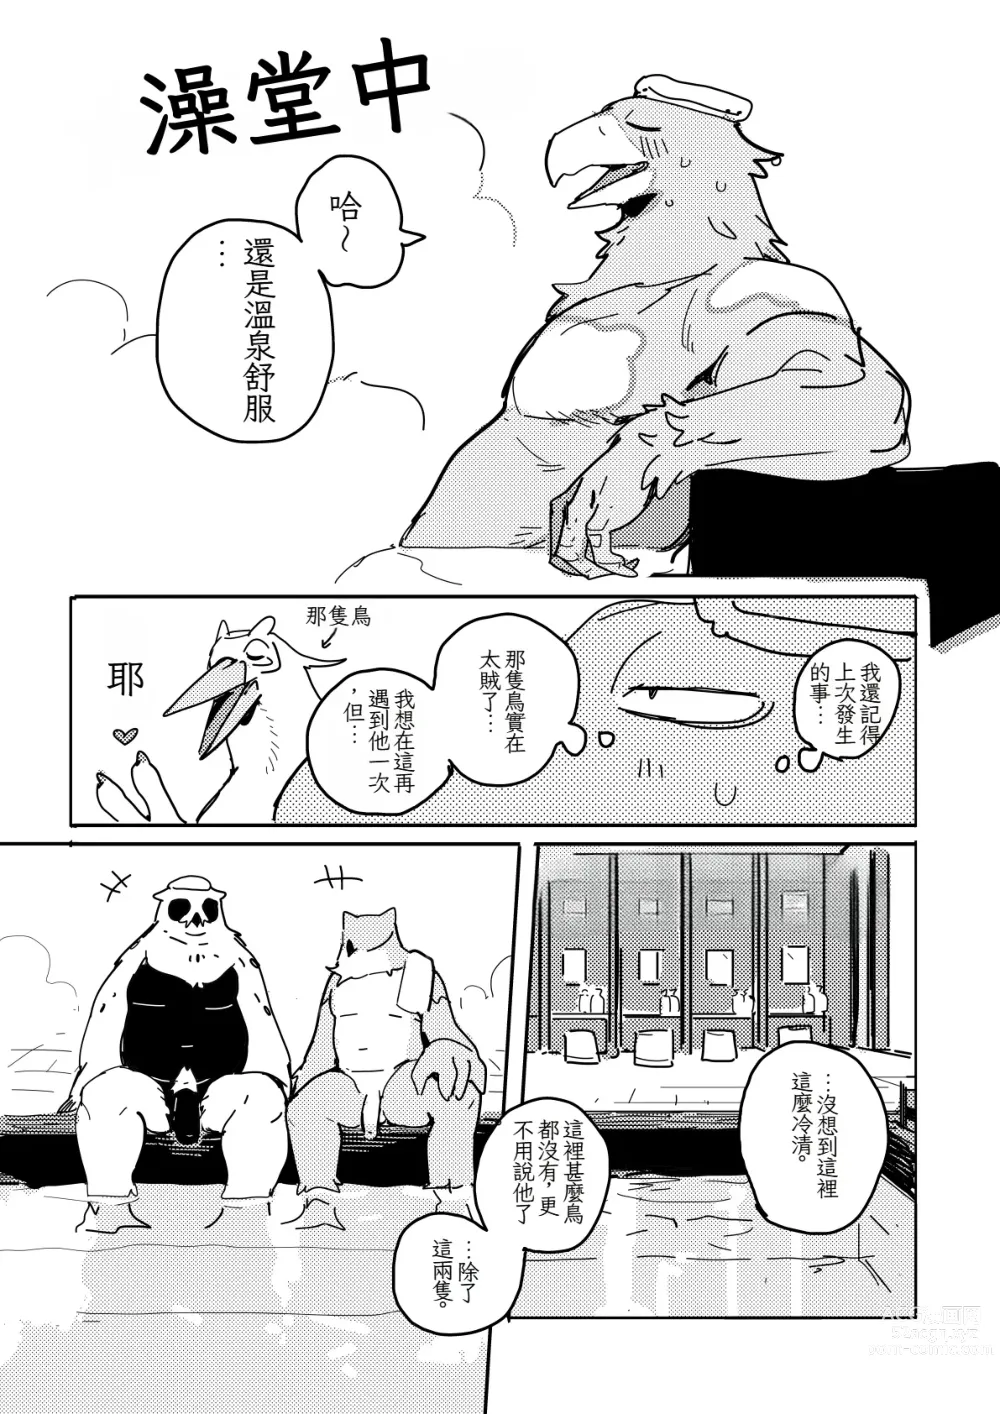 Page 1 of doujinshi White-Tailed Eagle and Owls 白尾鷹與鴞